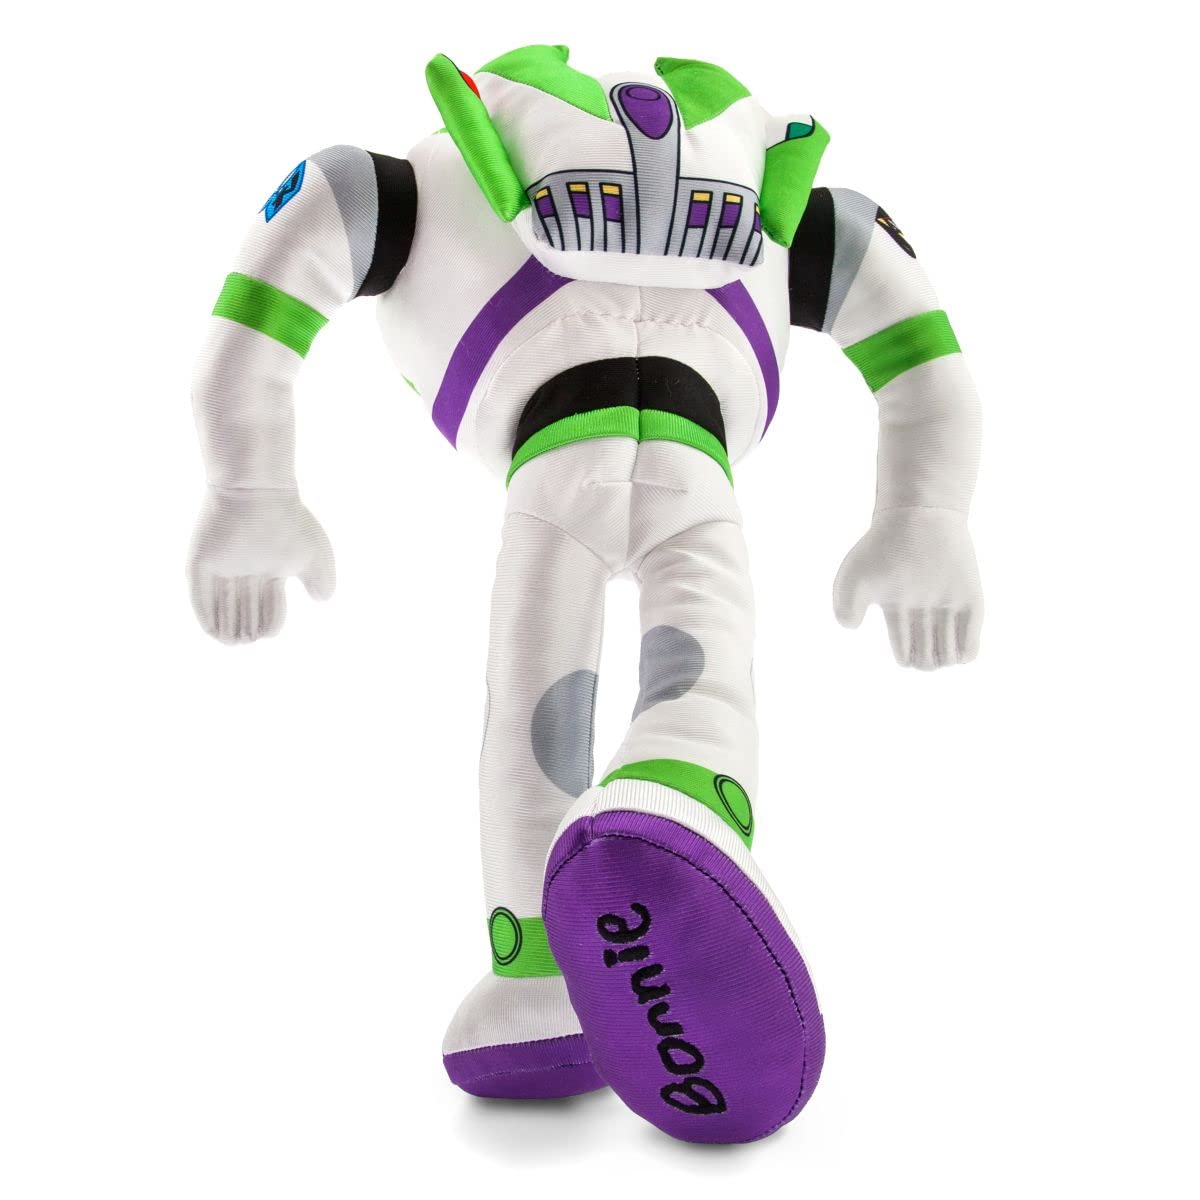 Disney Pixar Disney Store Official Buzz Lightyear Plush, Toy Story, Medium, 17 Inches, Iconic Cuddly Toy Character with Embroidered Features, Perfect Present for Kids, Suitable for All Ages 0+